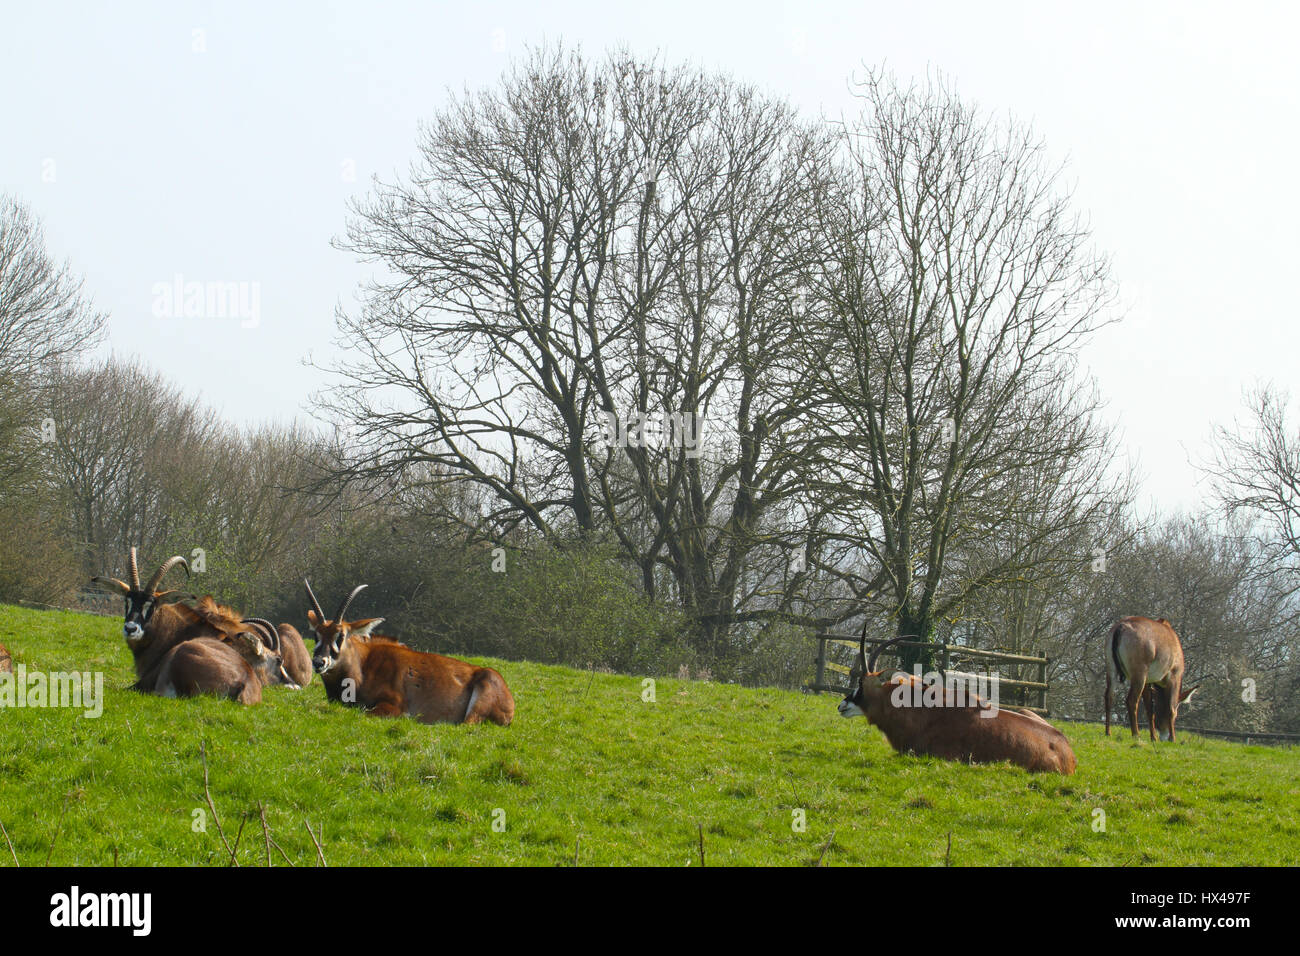 London, UK. March 24, 2017: A herd of roan antelopes in an enclosure at  Port Lympne Zoo on March 24, 2017. Port Lympne Reserve near the town of Hythe in Kent, England is set in 600 acres and incorporates the historic mansion and landscaped gardens. © David Mbiyu/Alamy Live News Stock Photo